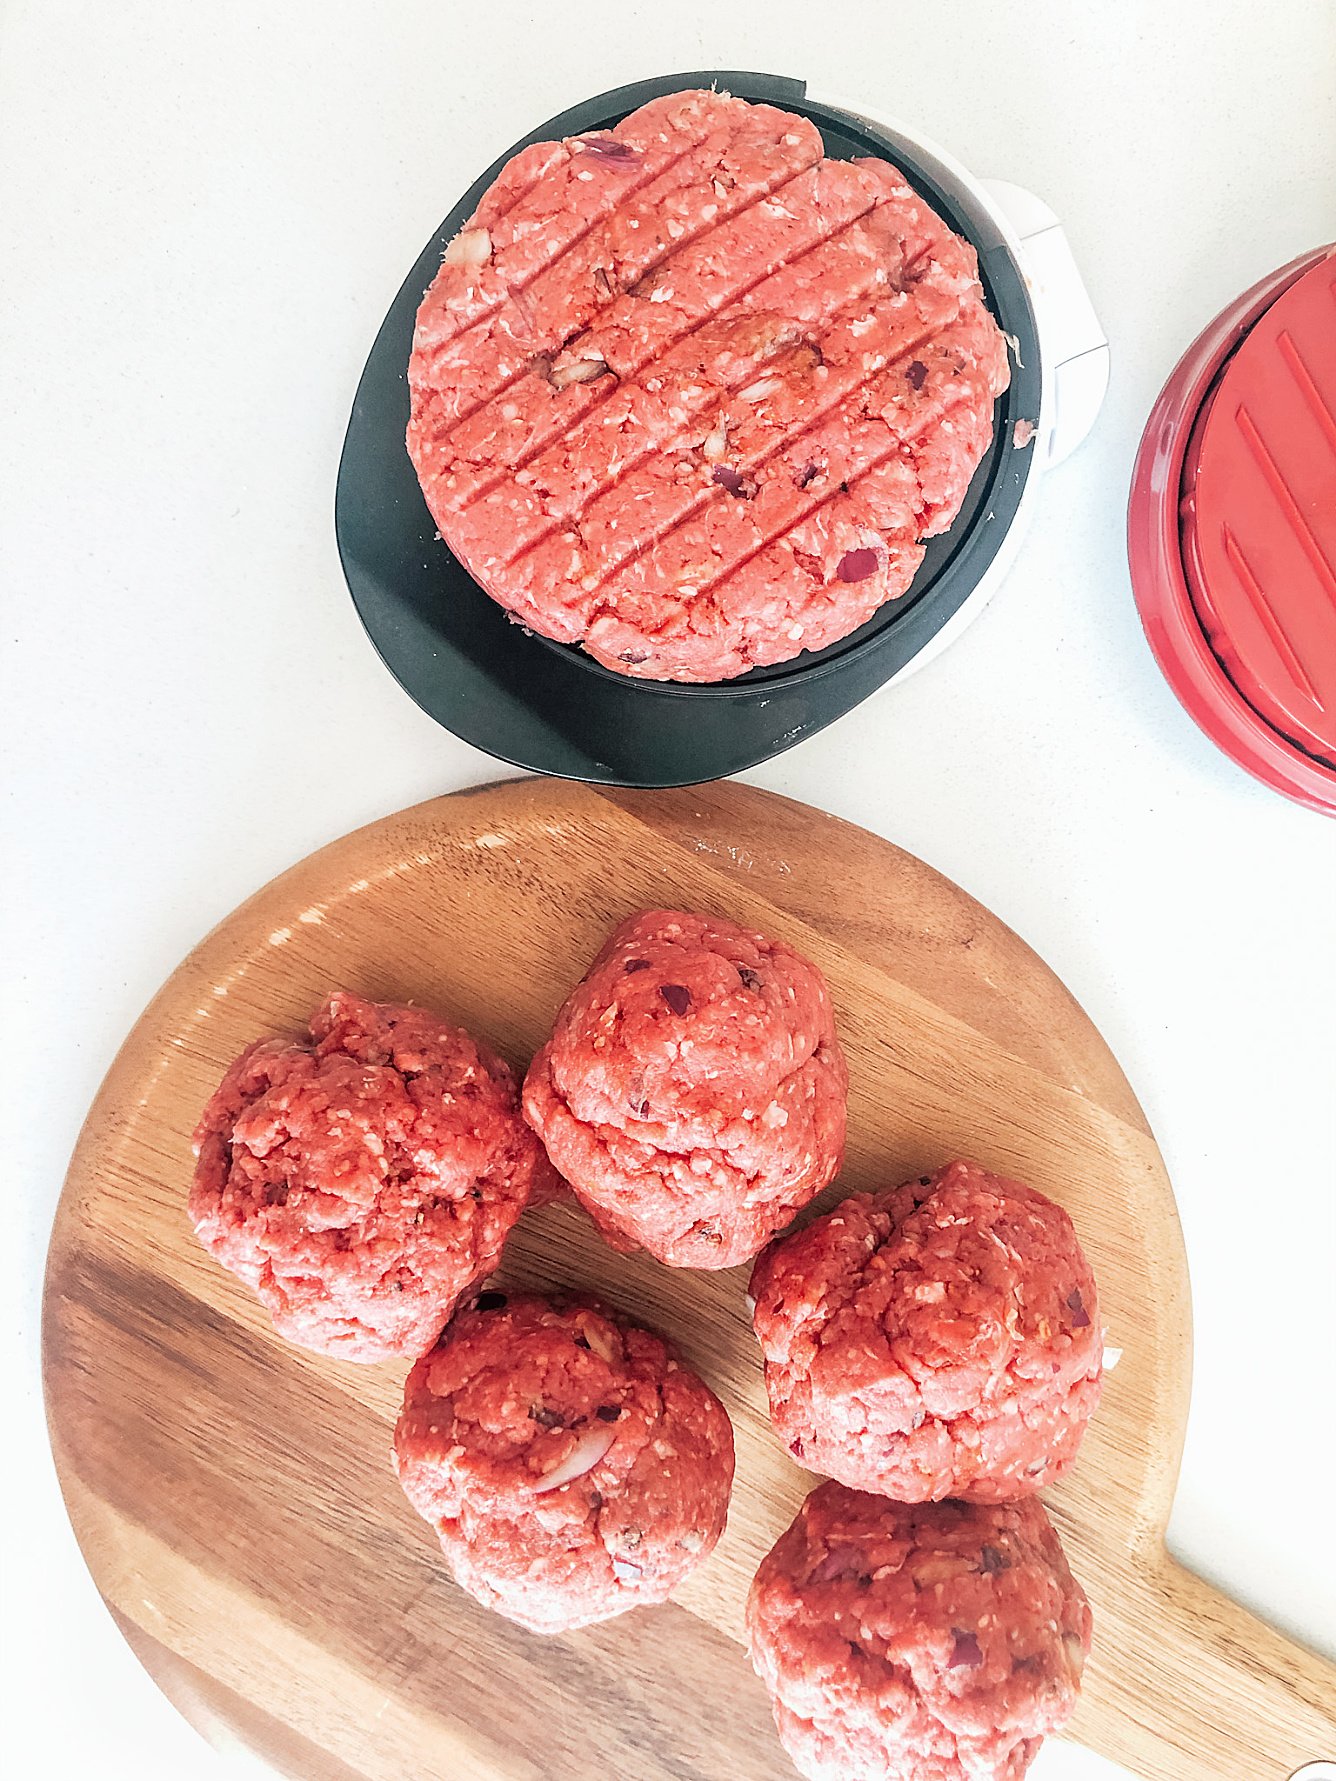 Now weight your burger patty mixture and split between 3 equal portions before using a burger press to form the patty